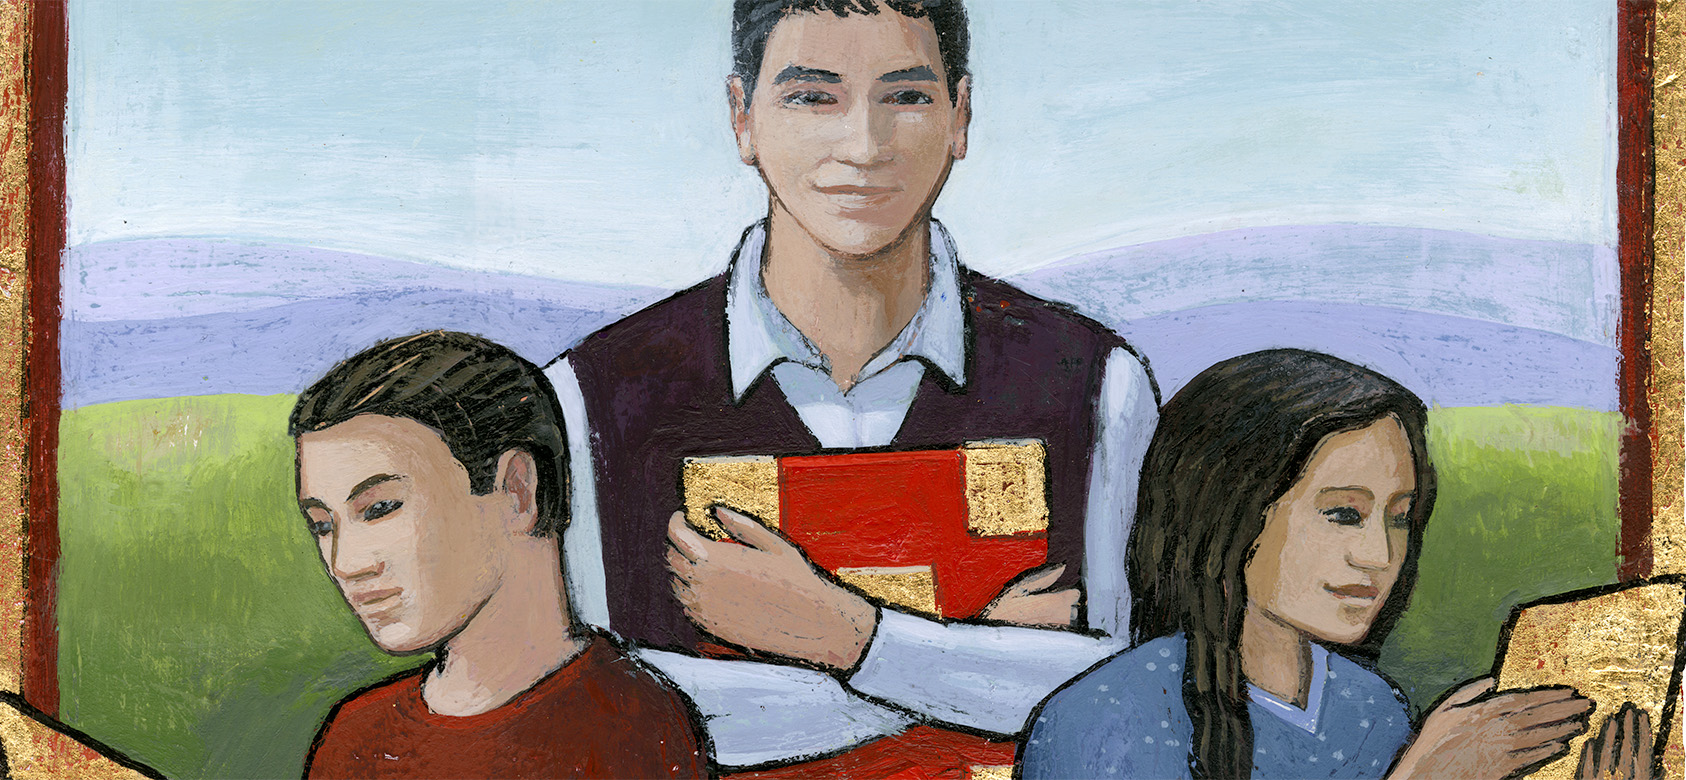 Illustrated image of a teacher in the centre of the image. On either side are two students looking at their respective devices.